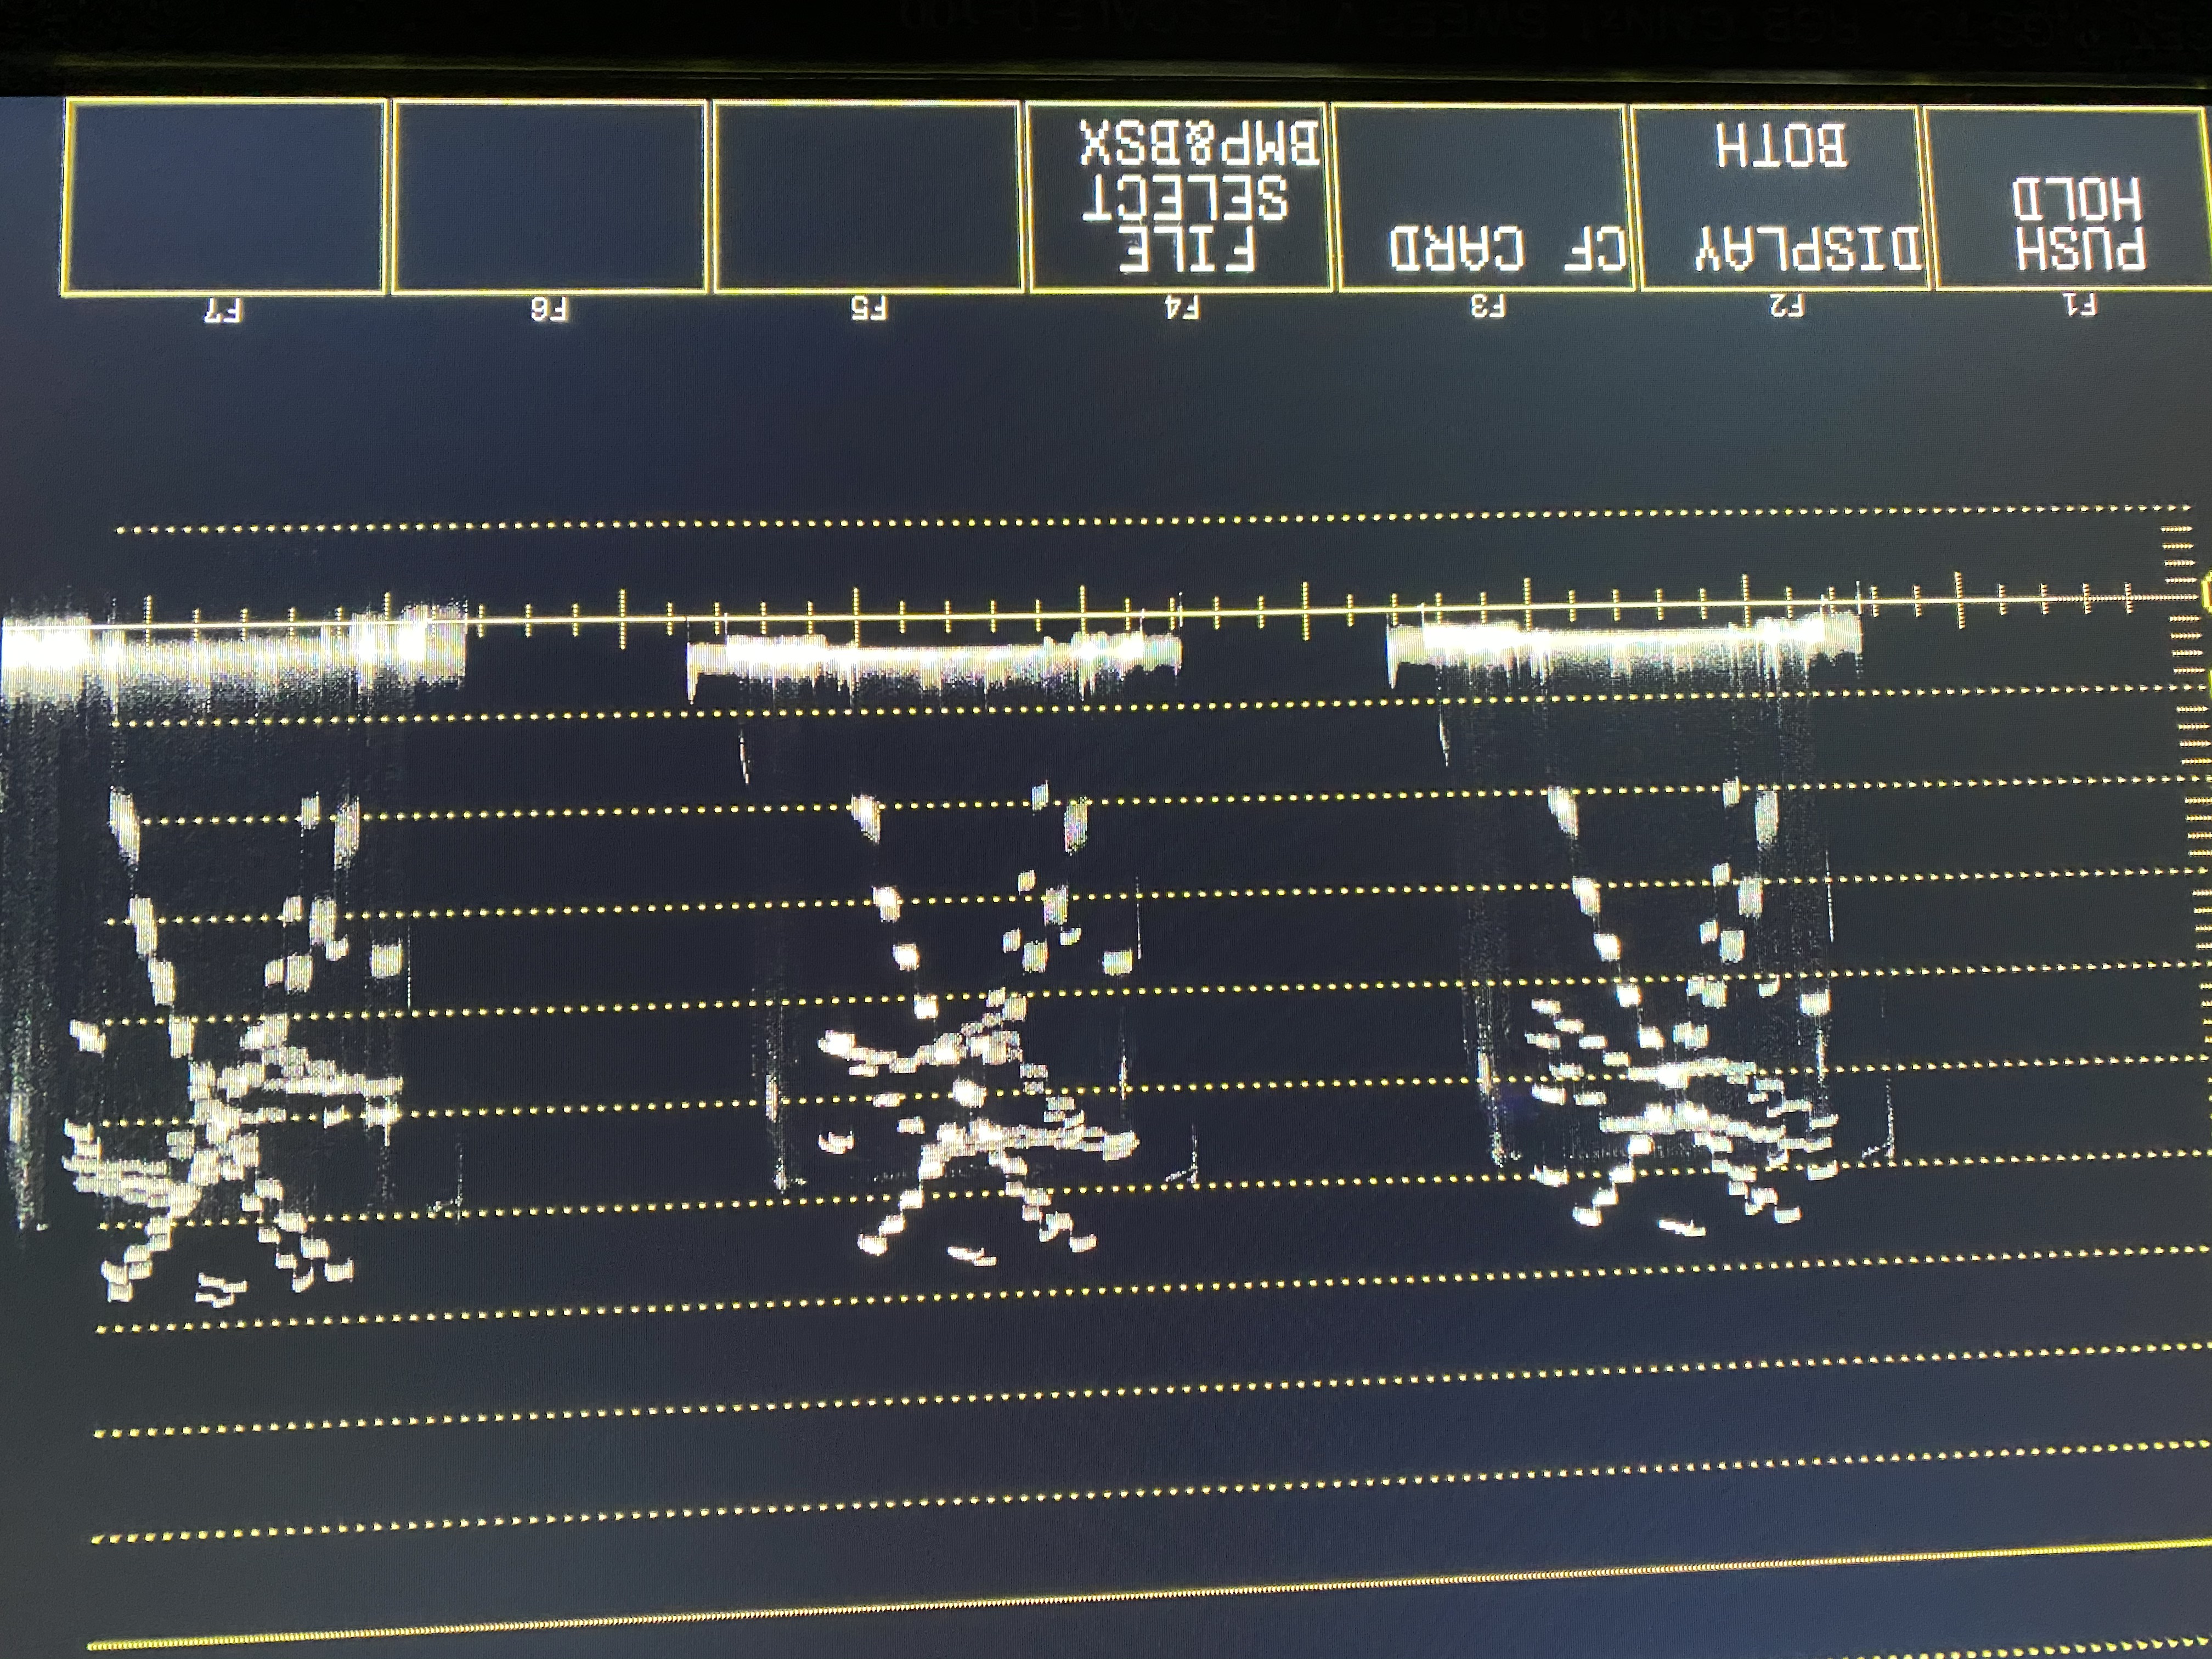 Simultaneous Waveform and Vectorscope outputs from Sony FX9 and VENICE show image similarities